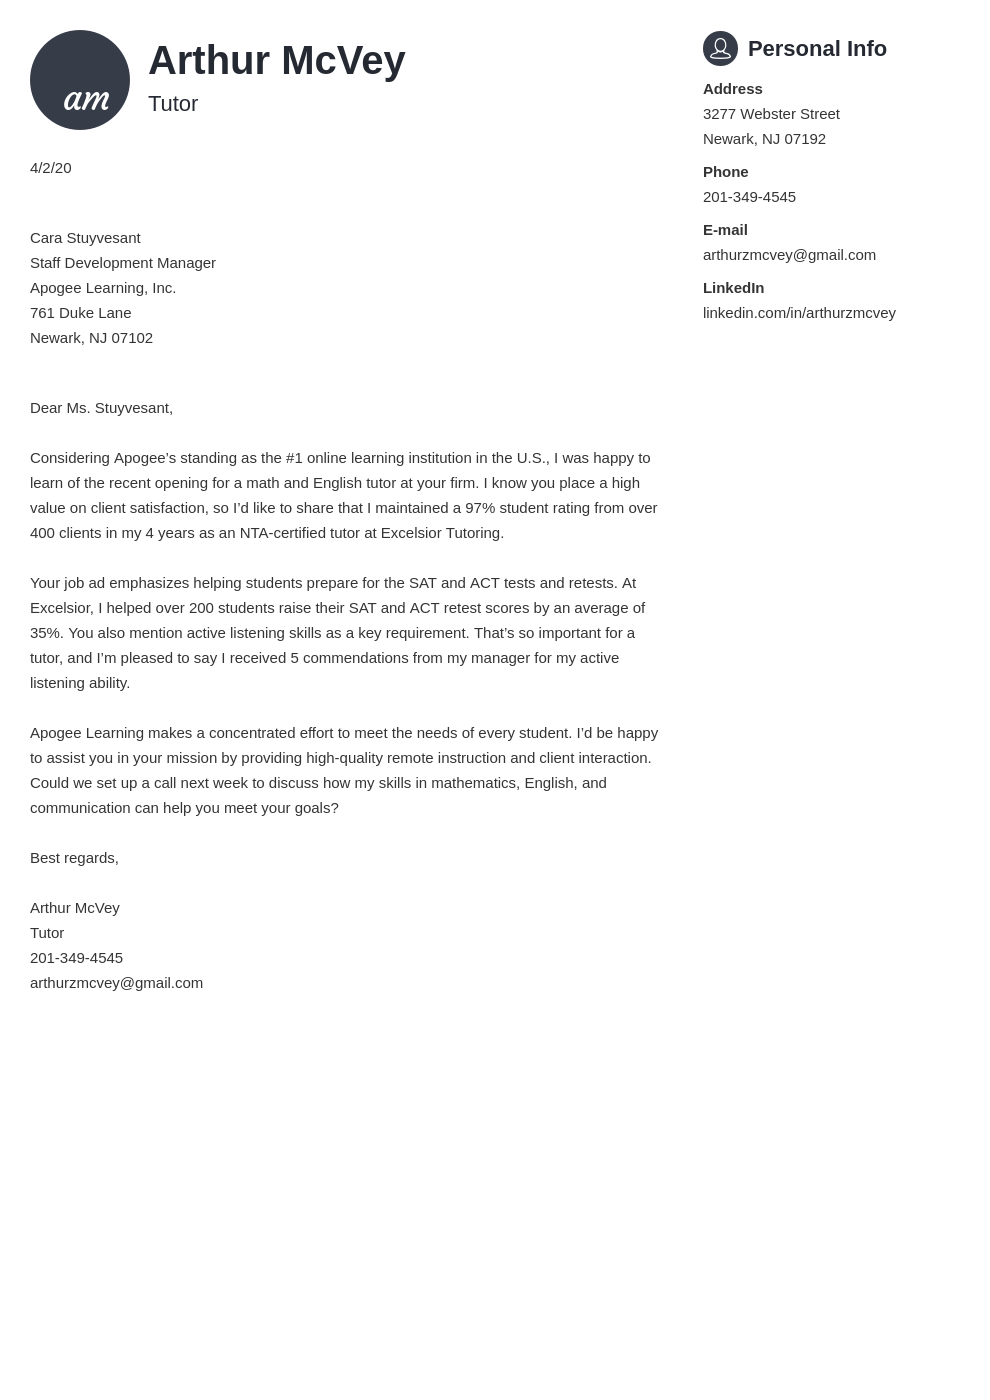 How To Write A Formal Cover Letter: Examples, Format & Guide